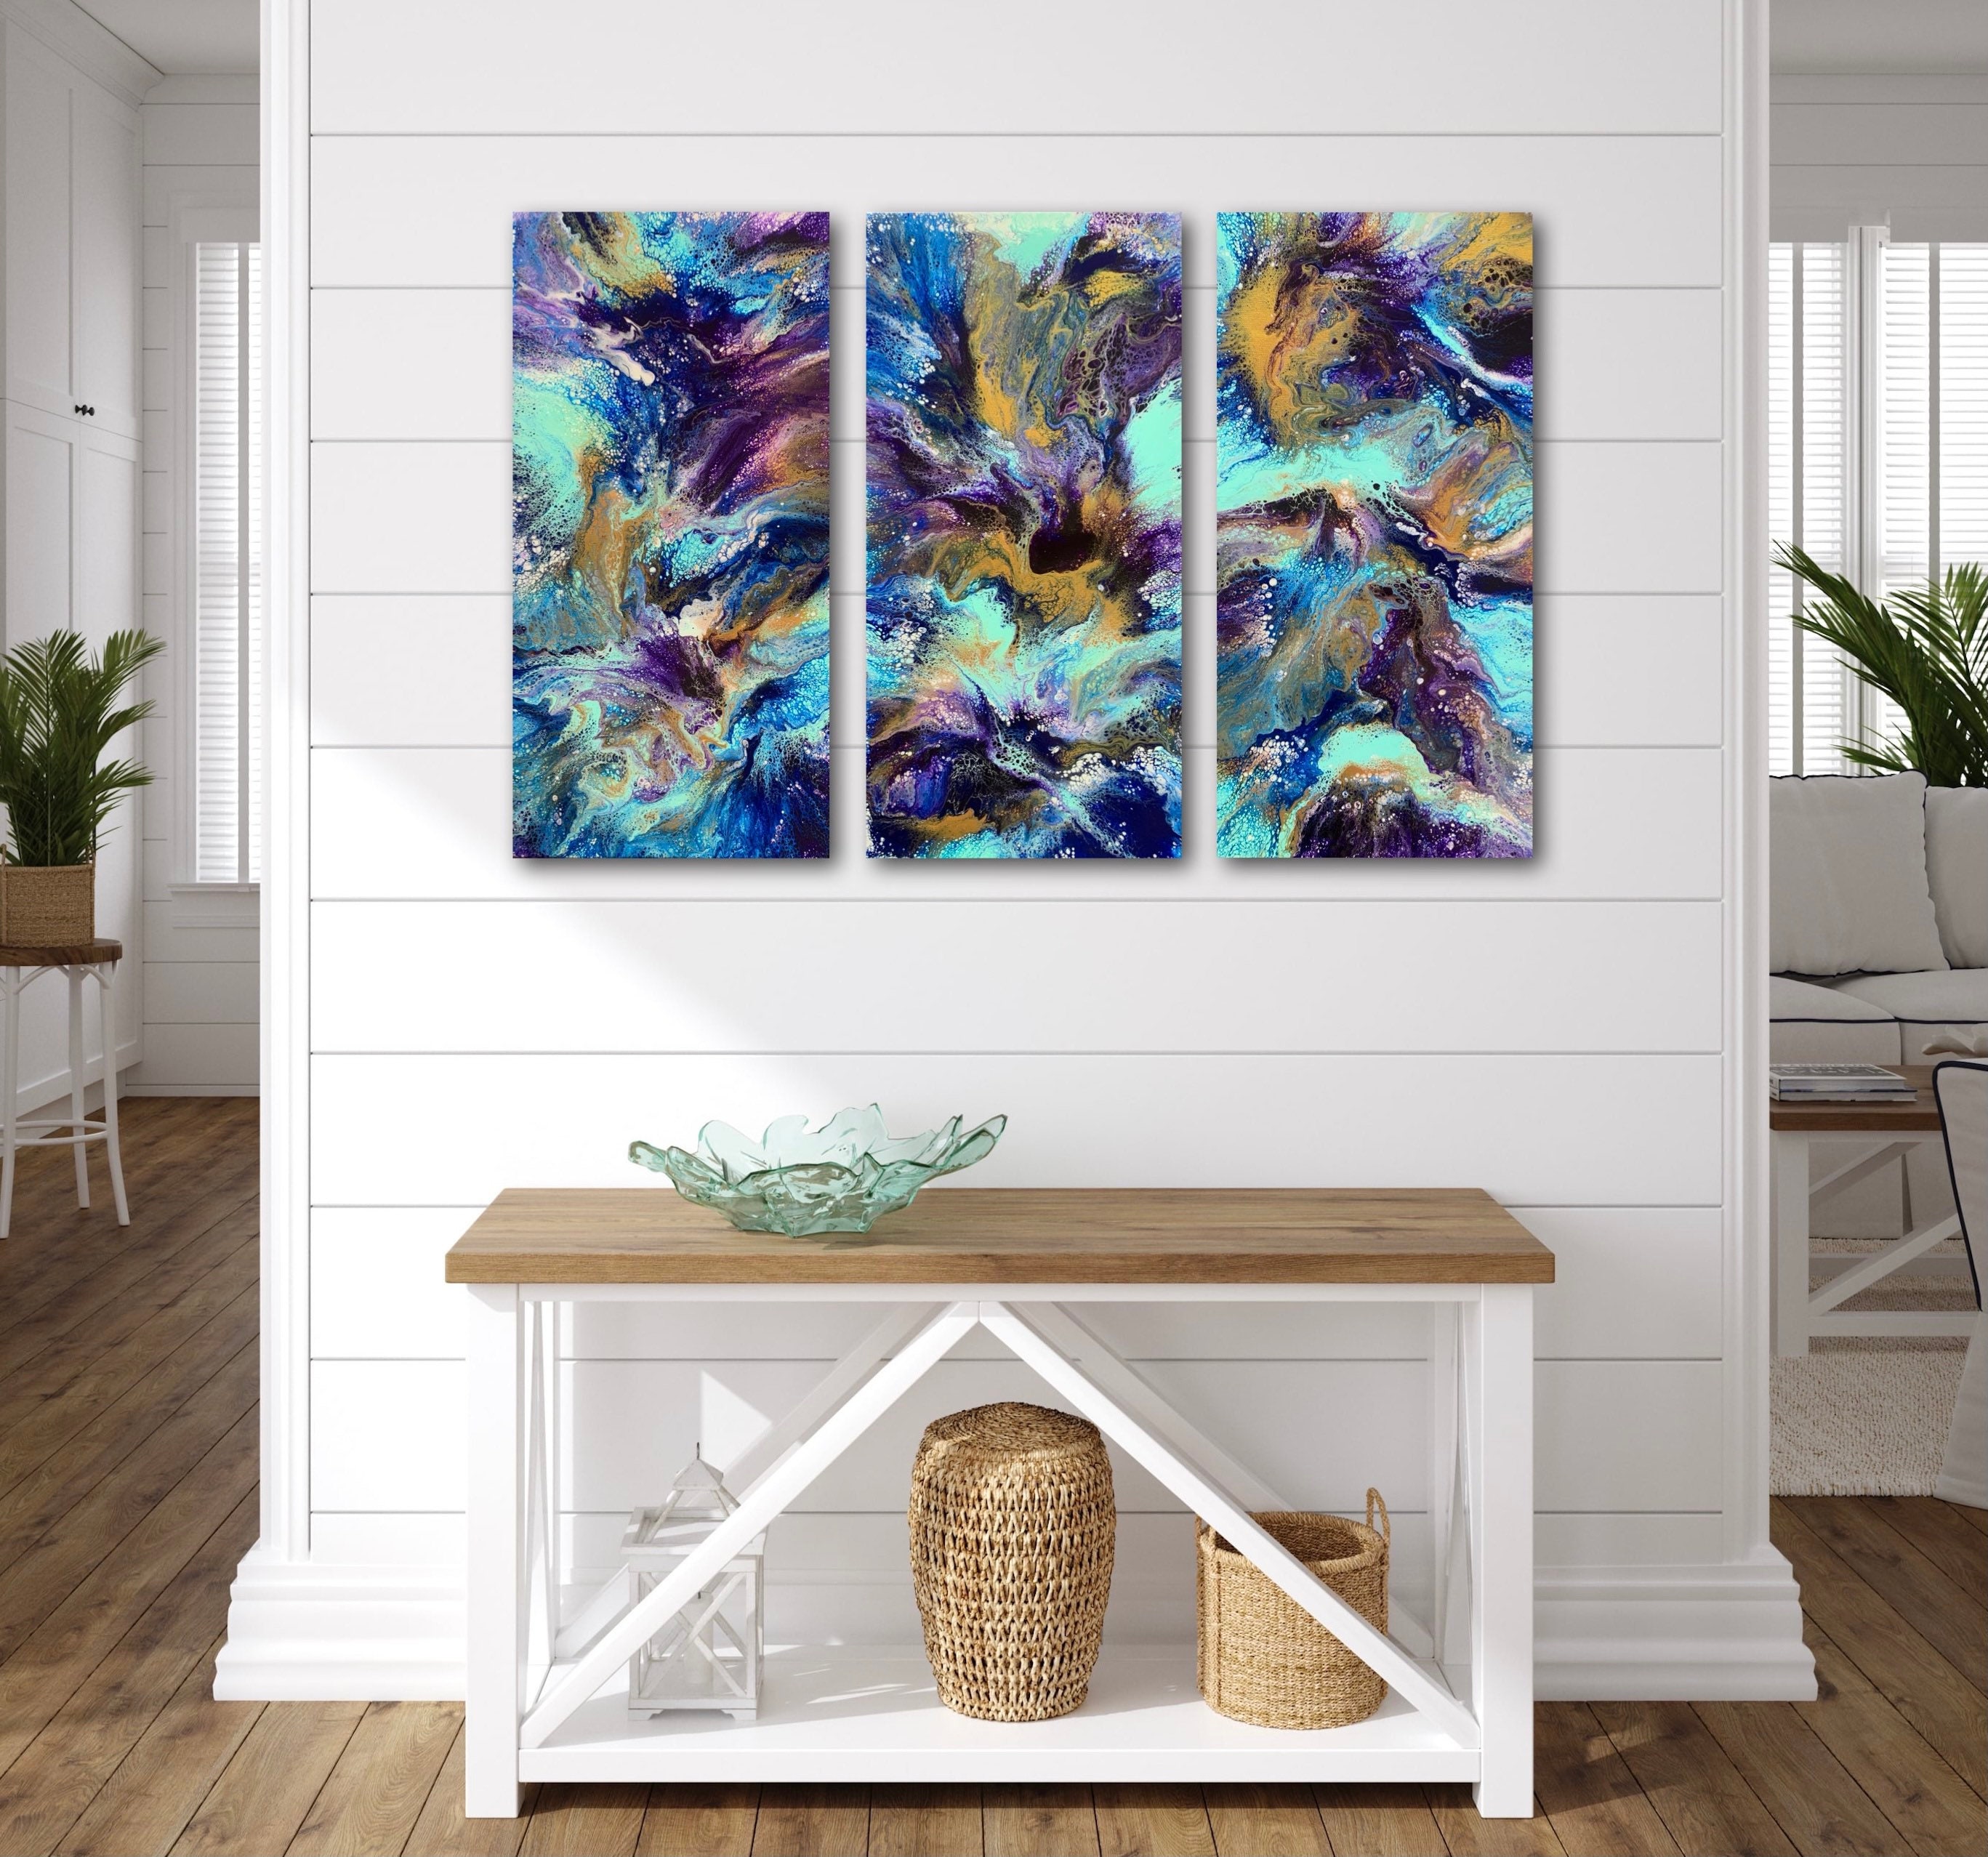 Gorgeous Triptych paintings/colourful abstract/set of 3 | Etsy